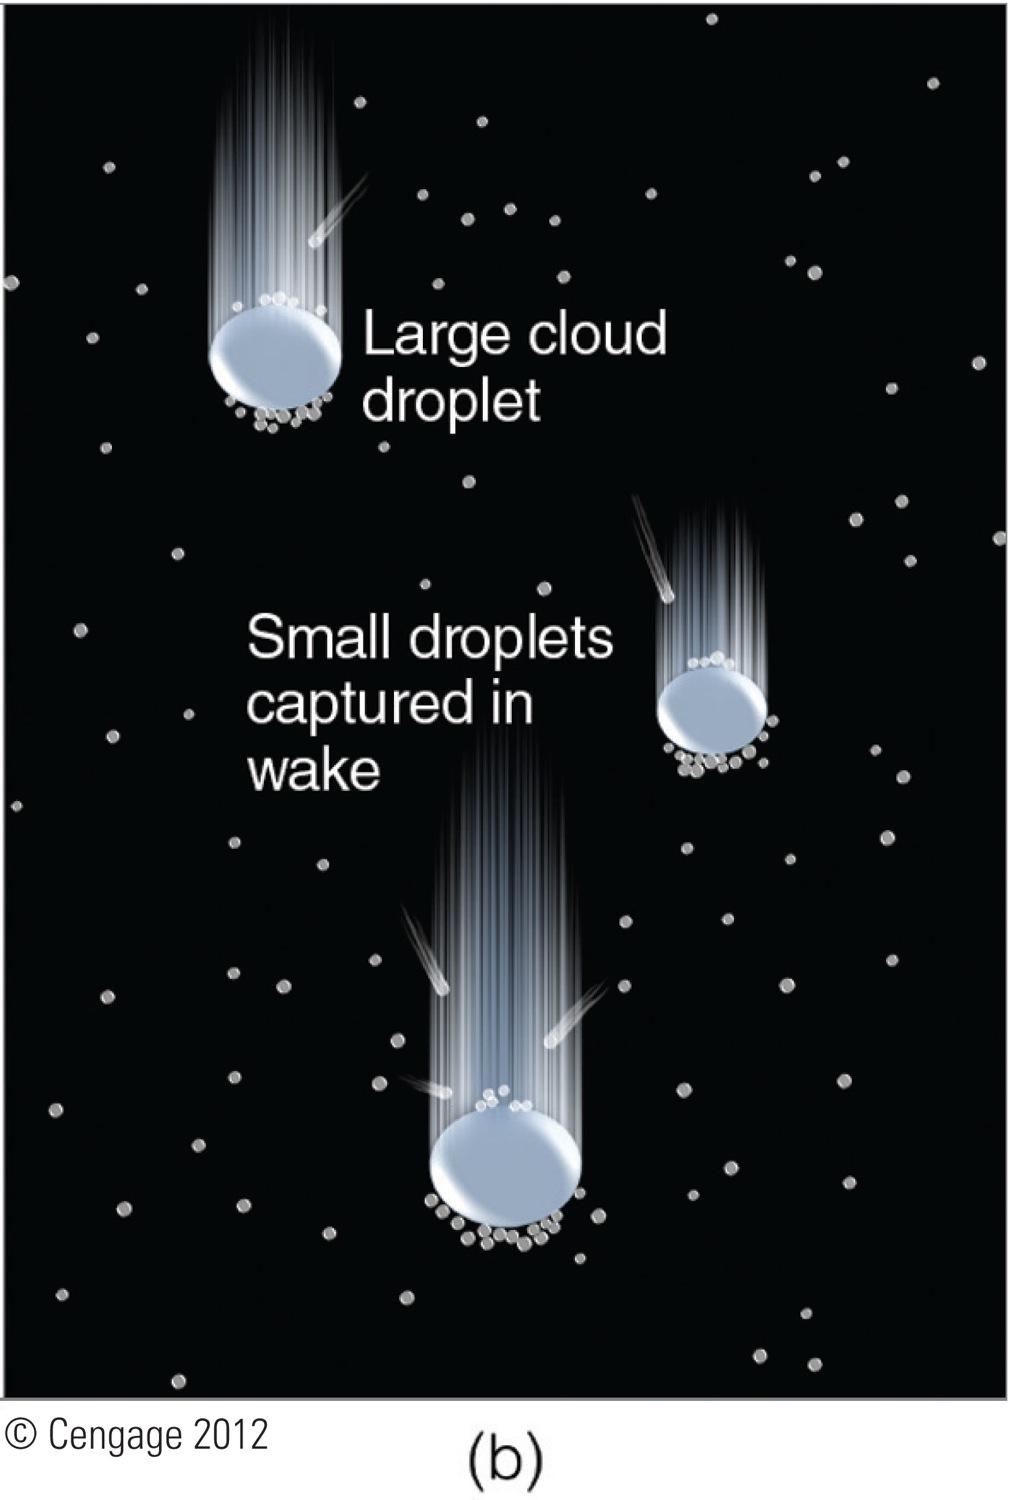 Coalescence: The merging of two liquid cloud droplets. Warm cloud: A cloud in which the temperature is above freezing everywhere and all cloud droplets are liquid.